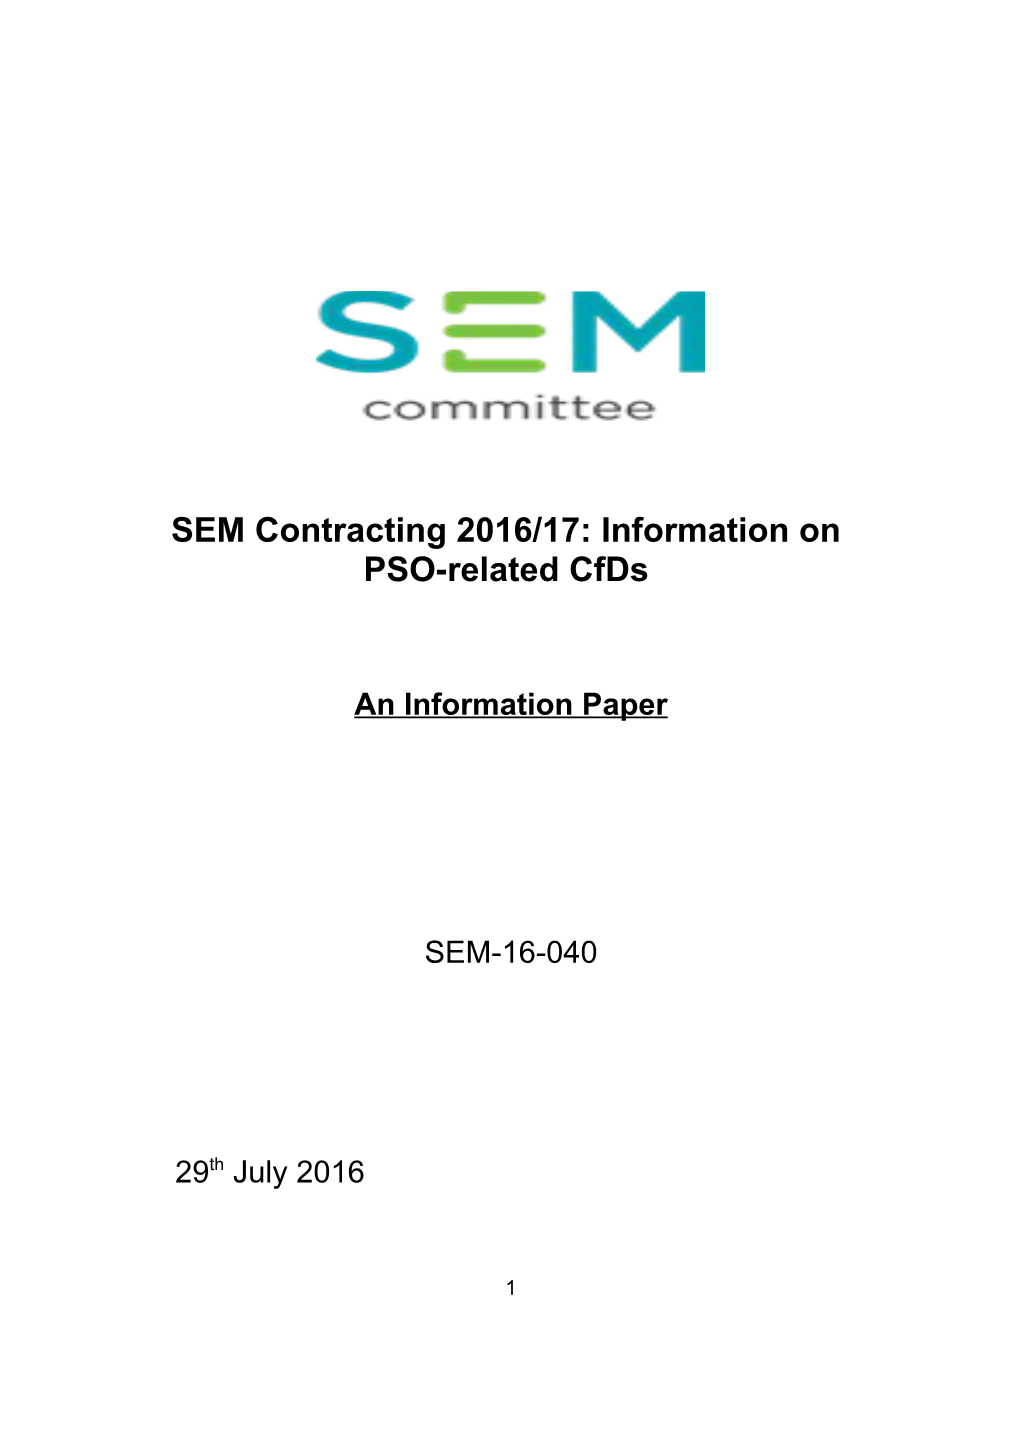 Directed Contract Implementation Report